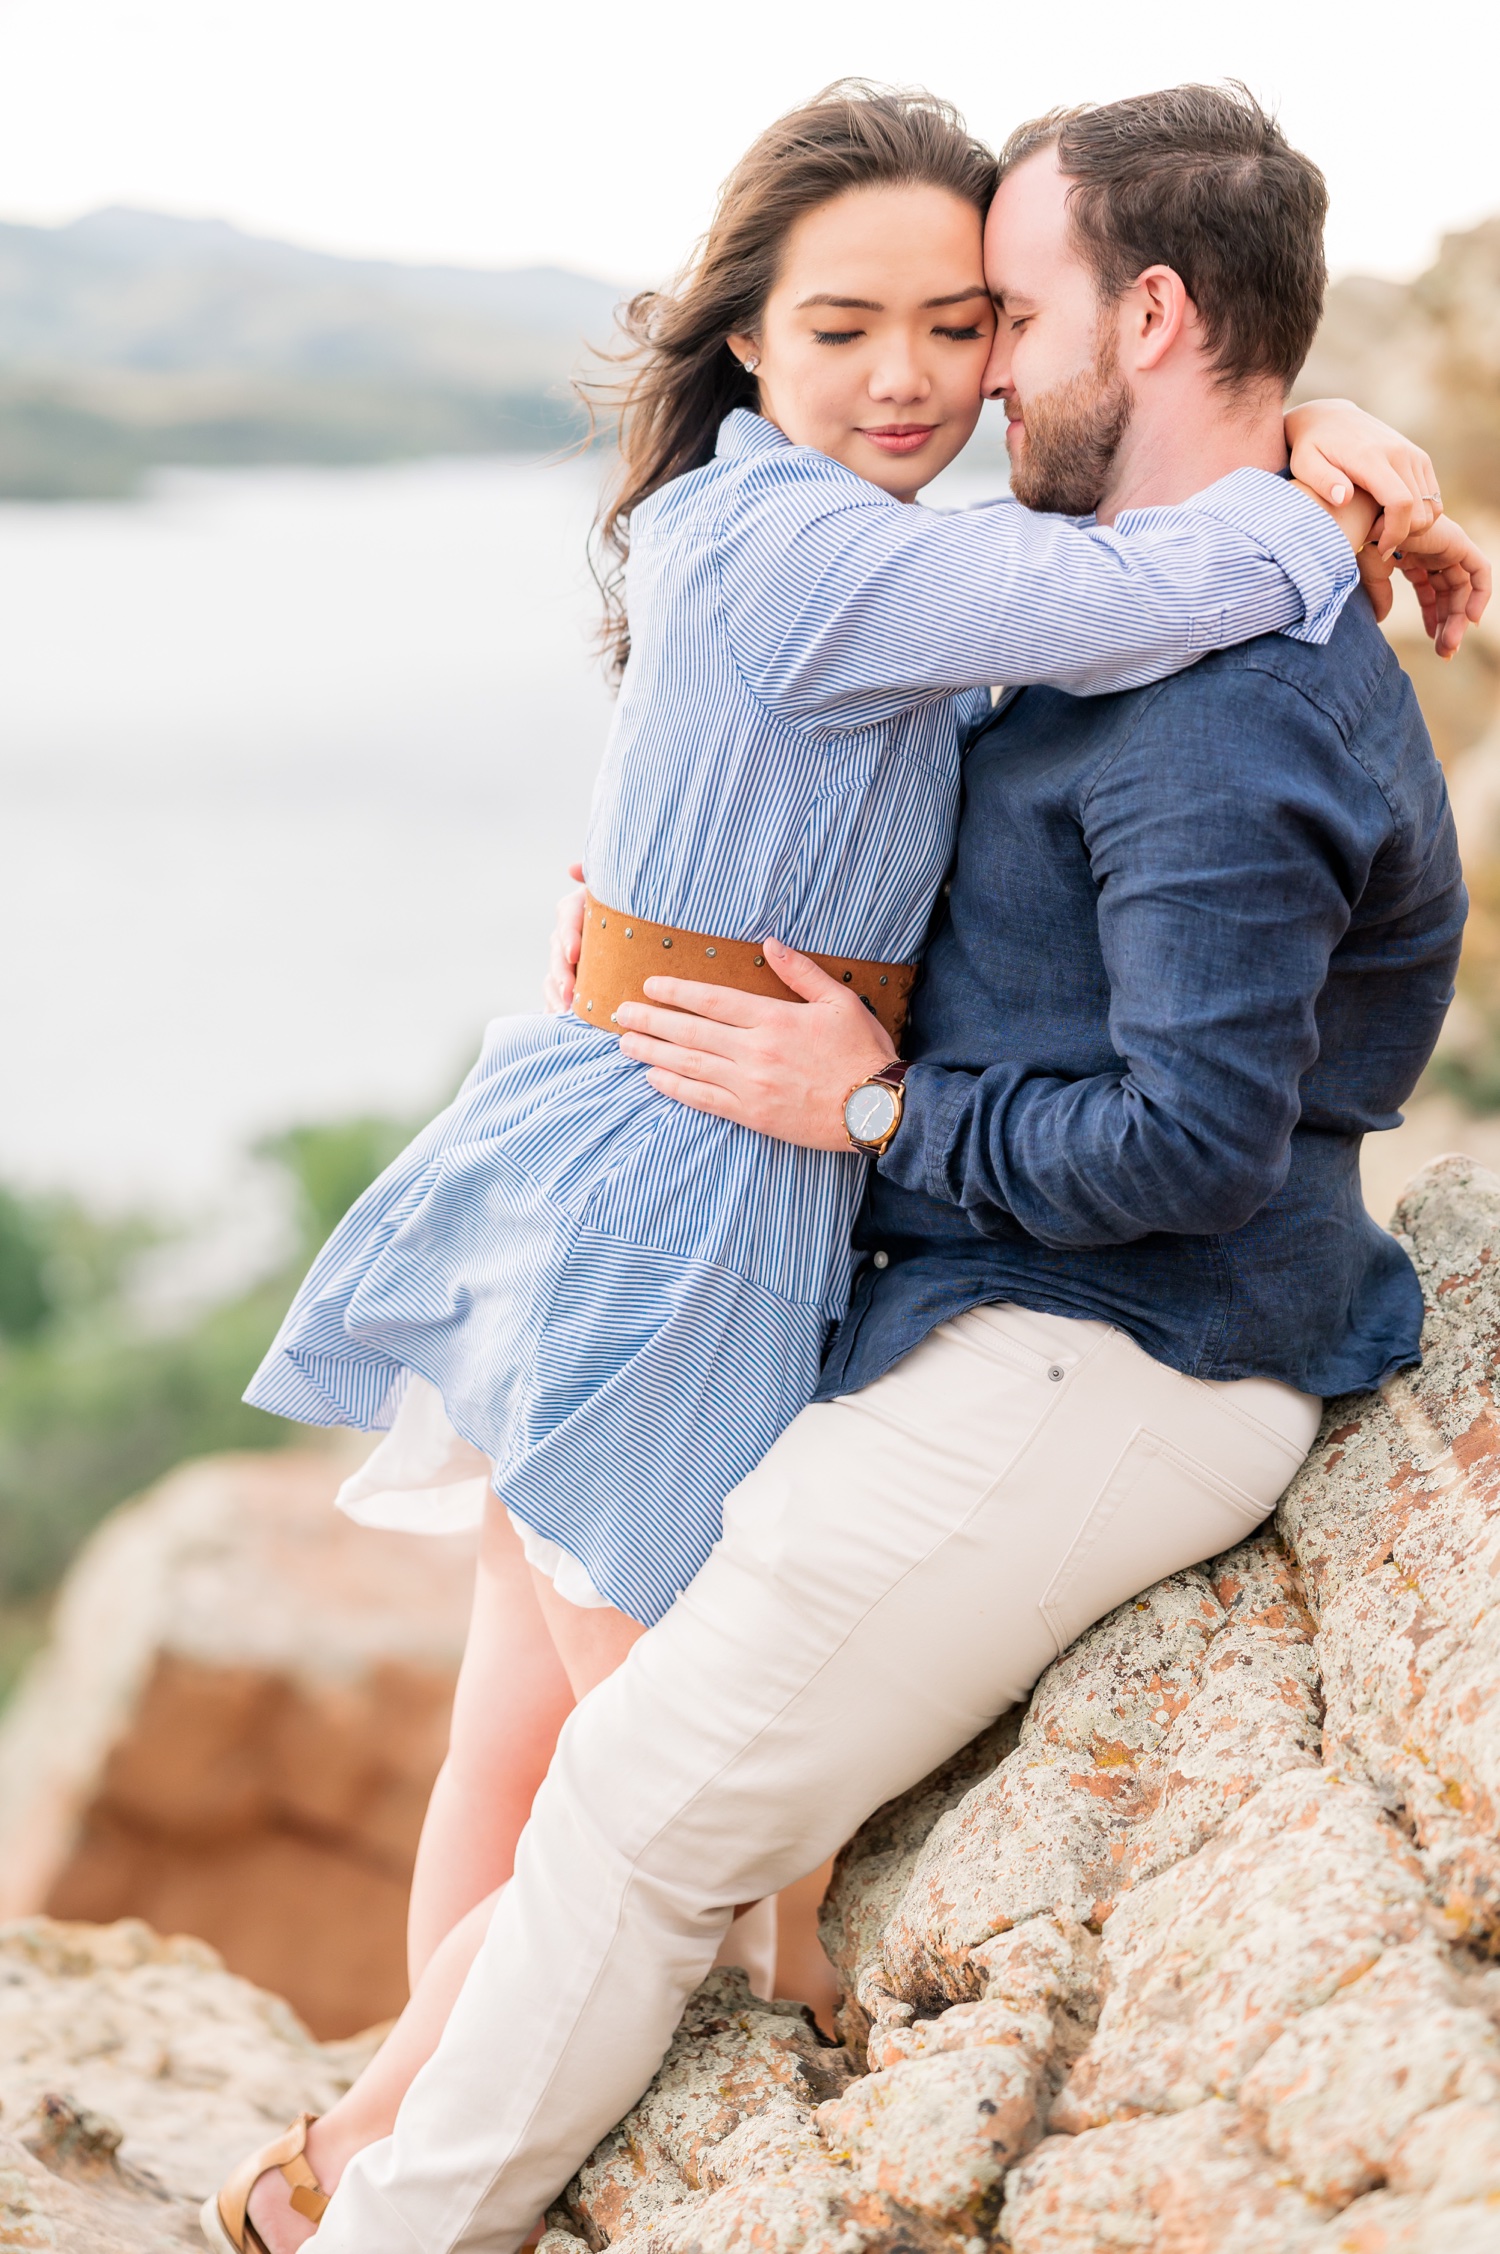 Betsy + Luke | Engagement Session in Fort Wayne, Indiana - ariellepeters.com